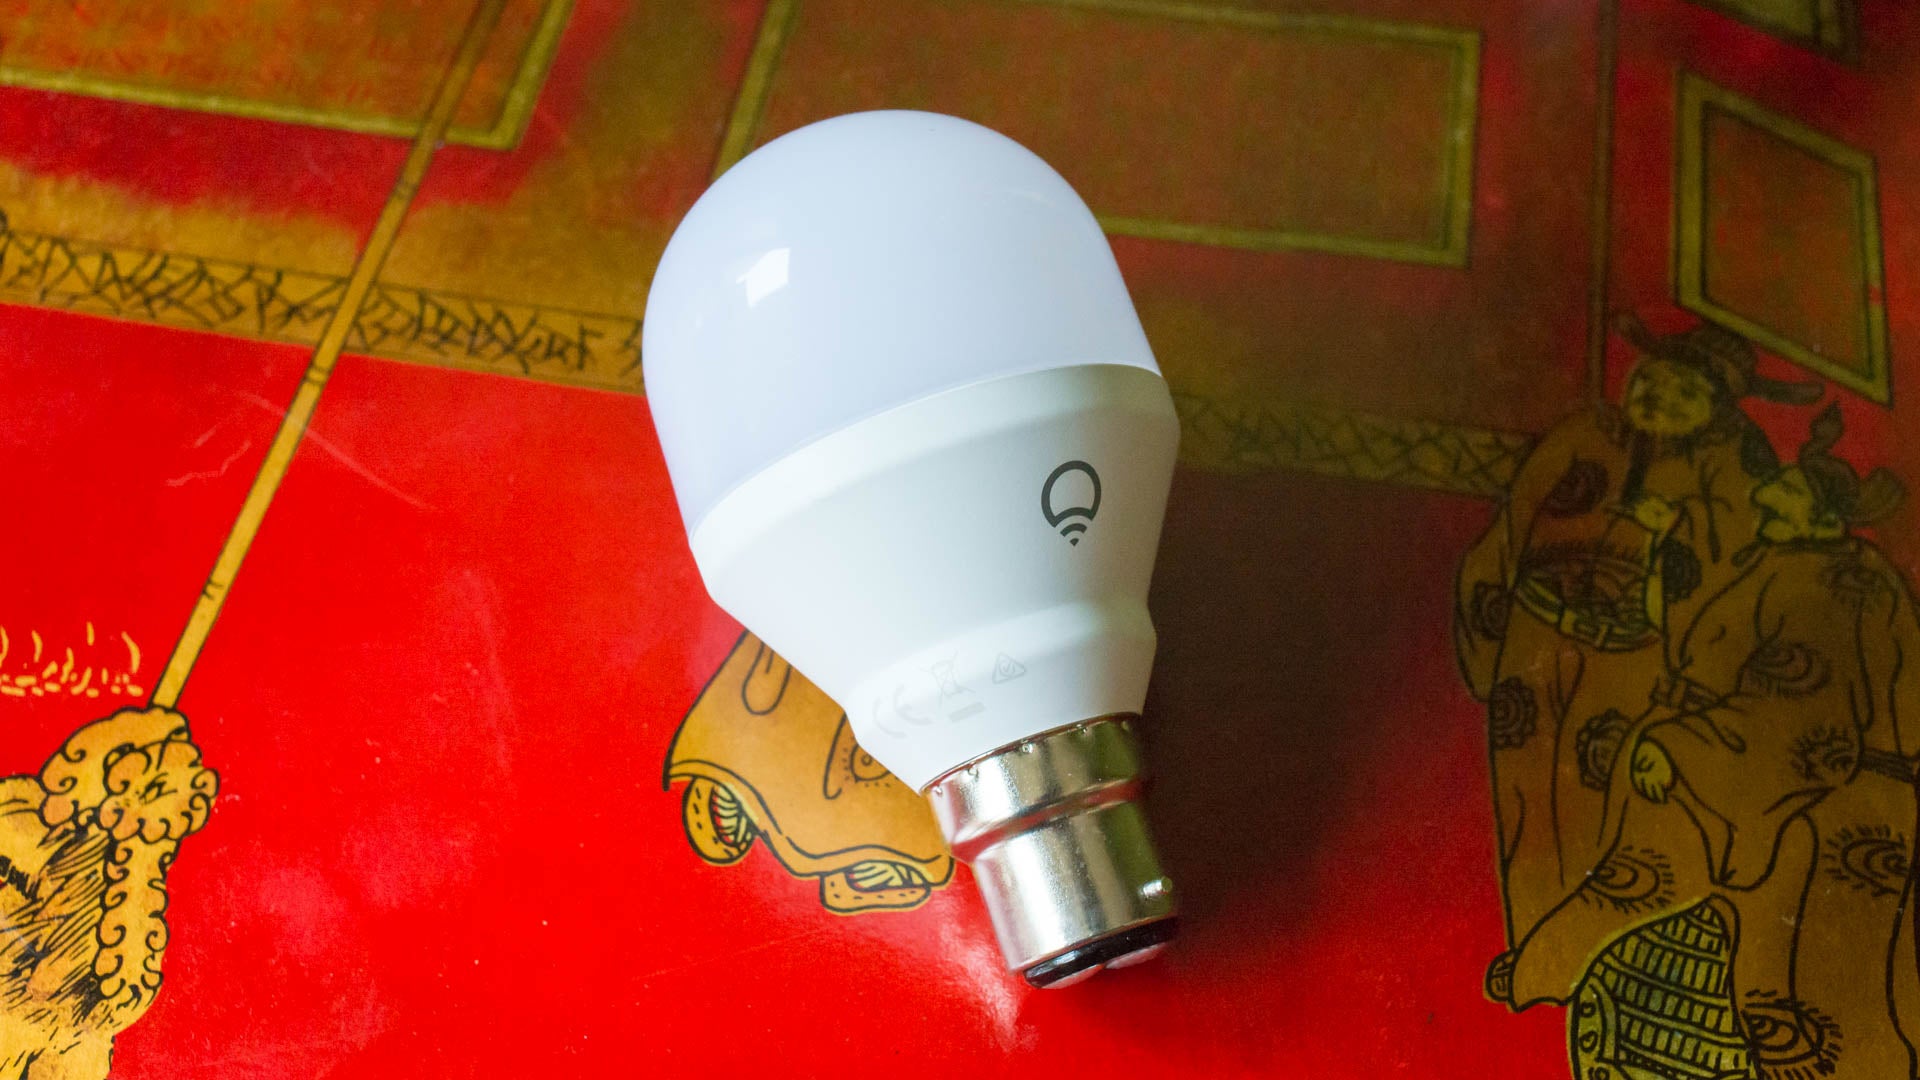 LIFX Mini Smart Bulb on patterned red surface.